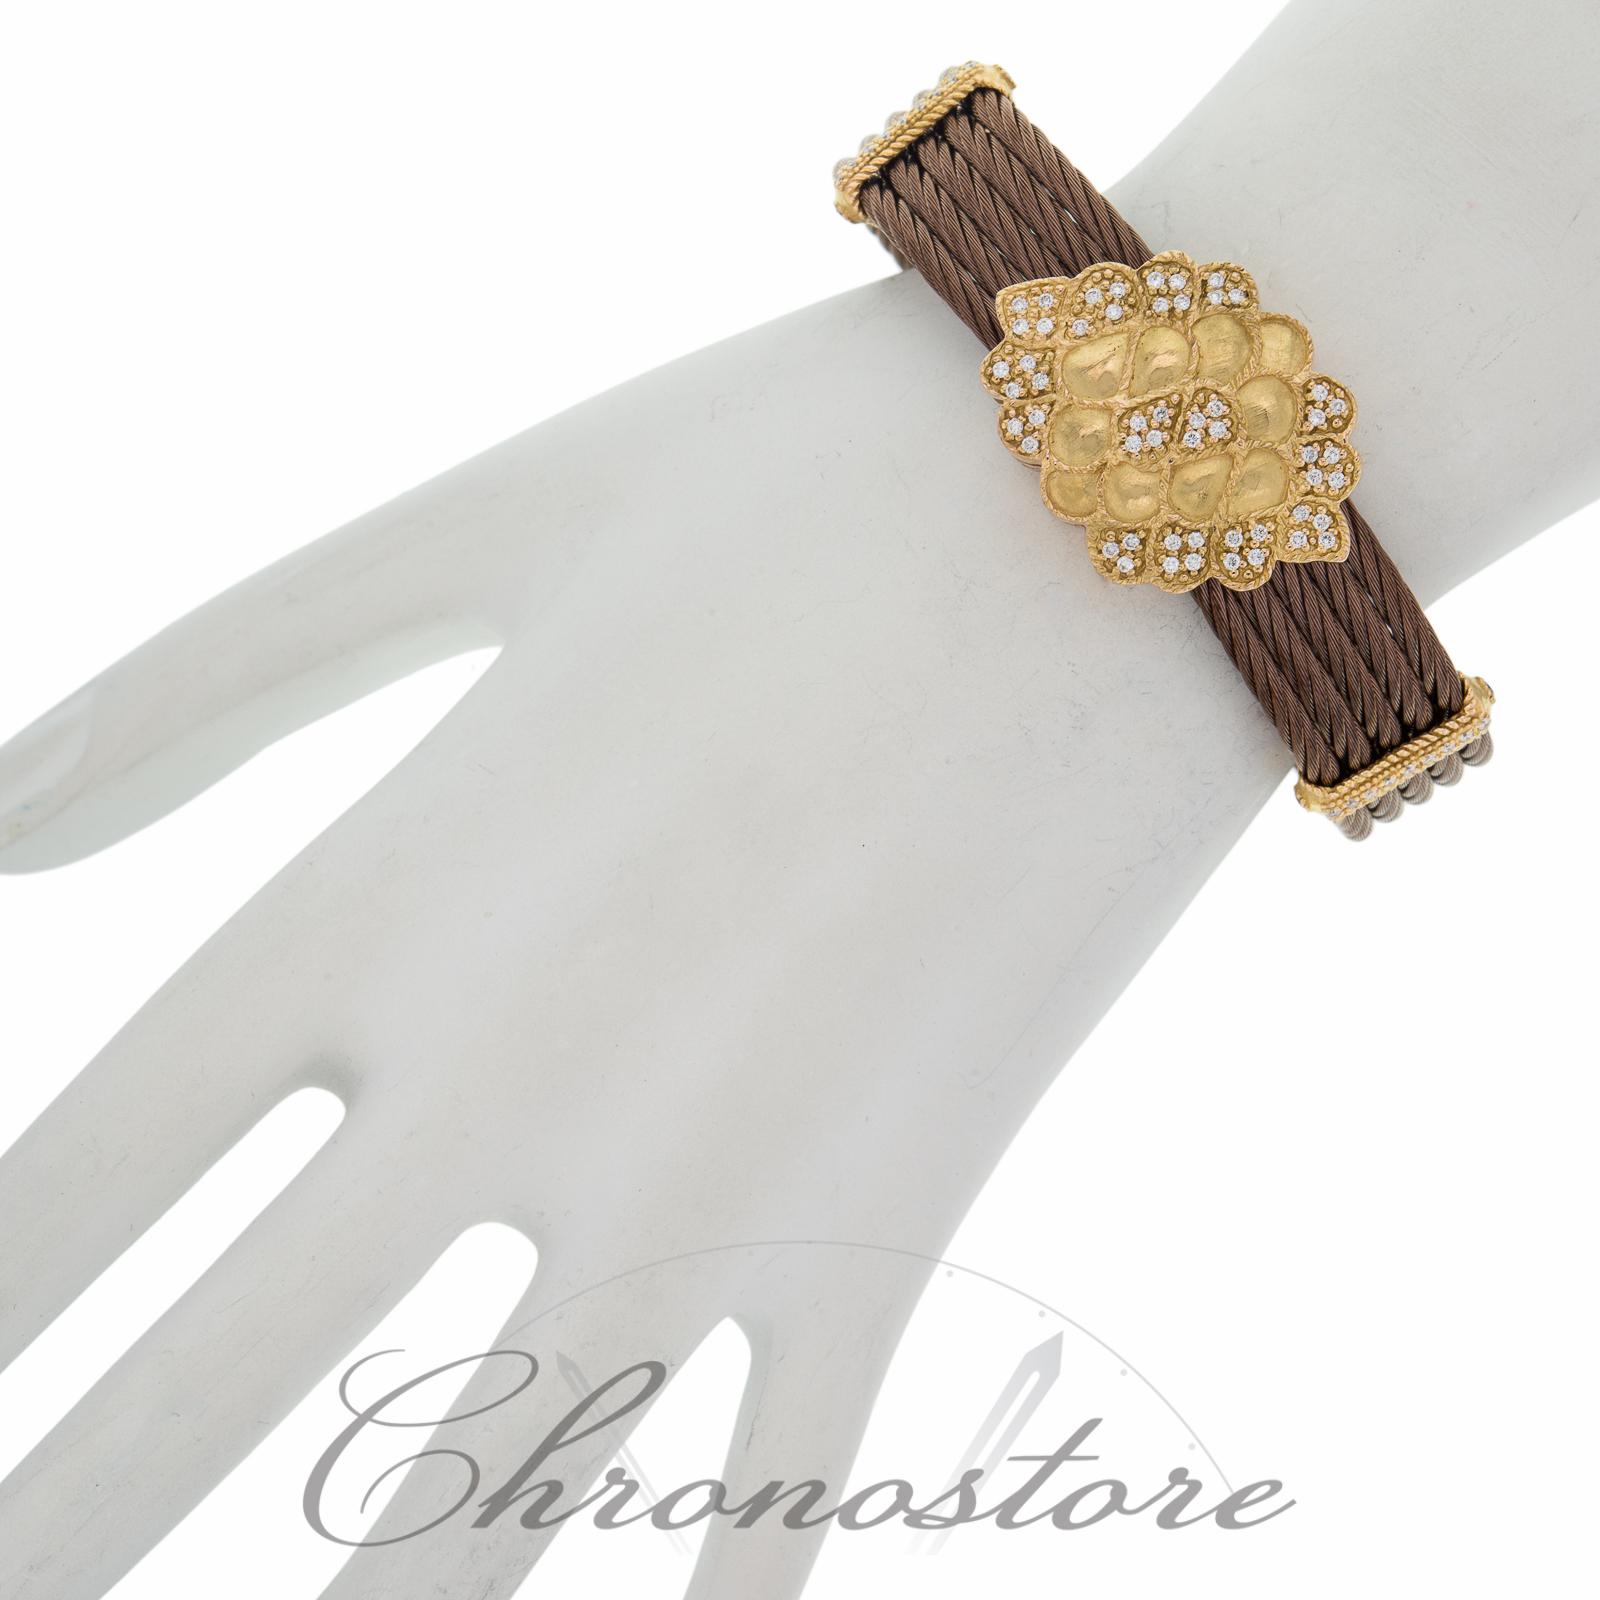 (4733)

Charriol Celtique Collection 18KT Gold & Bronze PVD Stainless Steel Cable Bangle Bracelet with .54ctw in Diamonds.

Charriol is a Swiss manufacturer of jewelry, watches, and other accessories. Charriol is one of the largest makers of